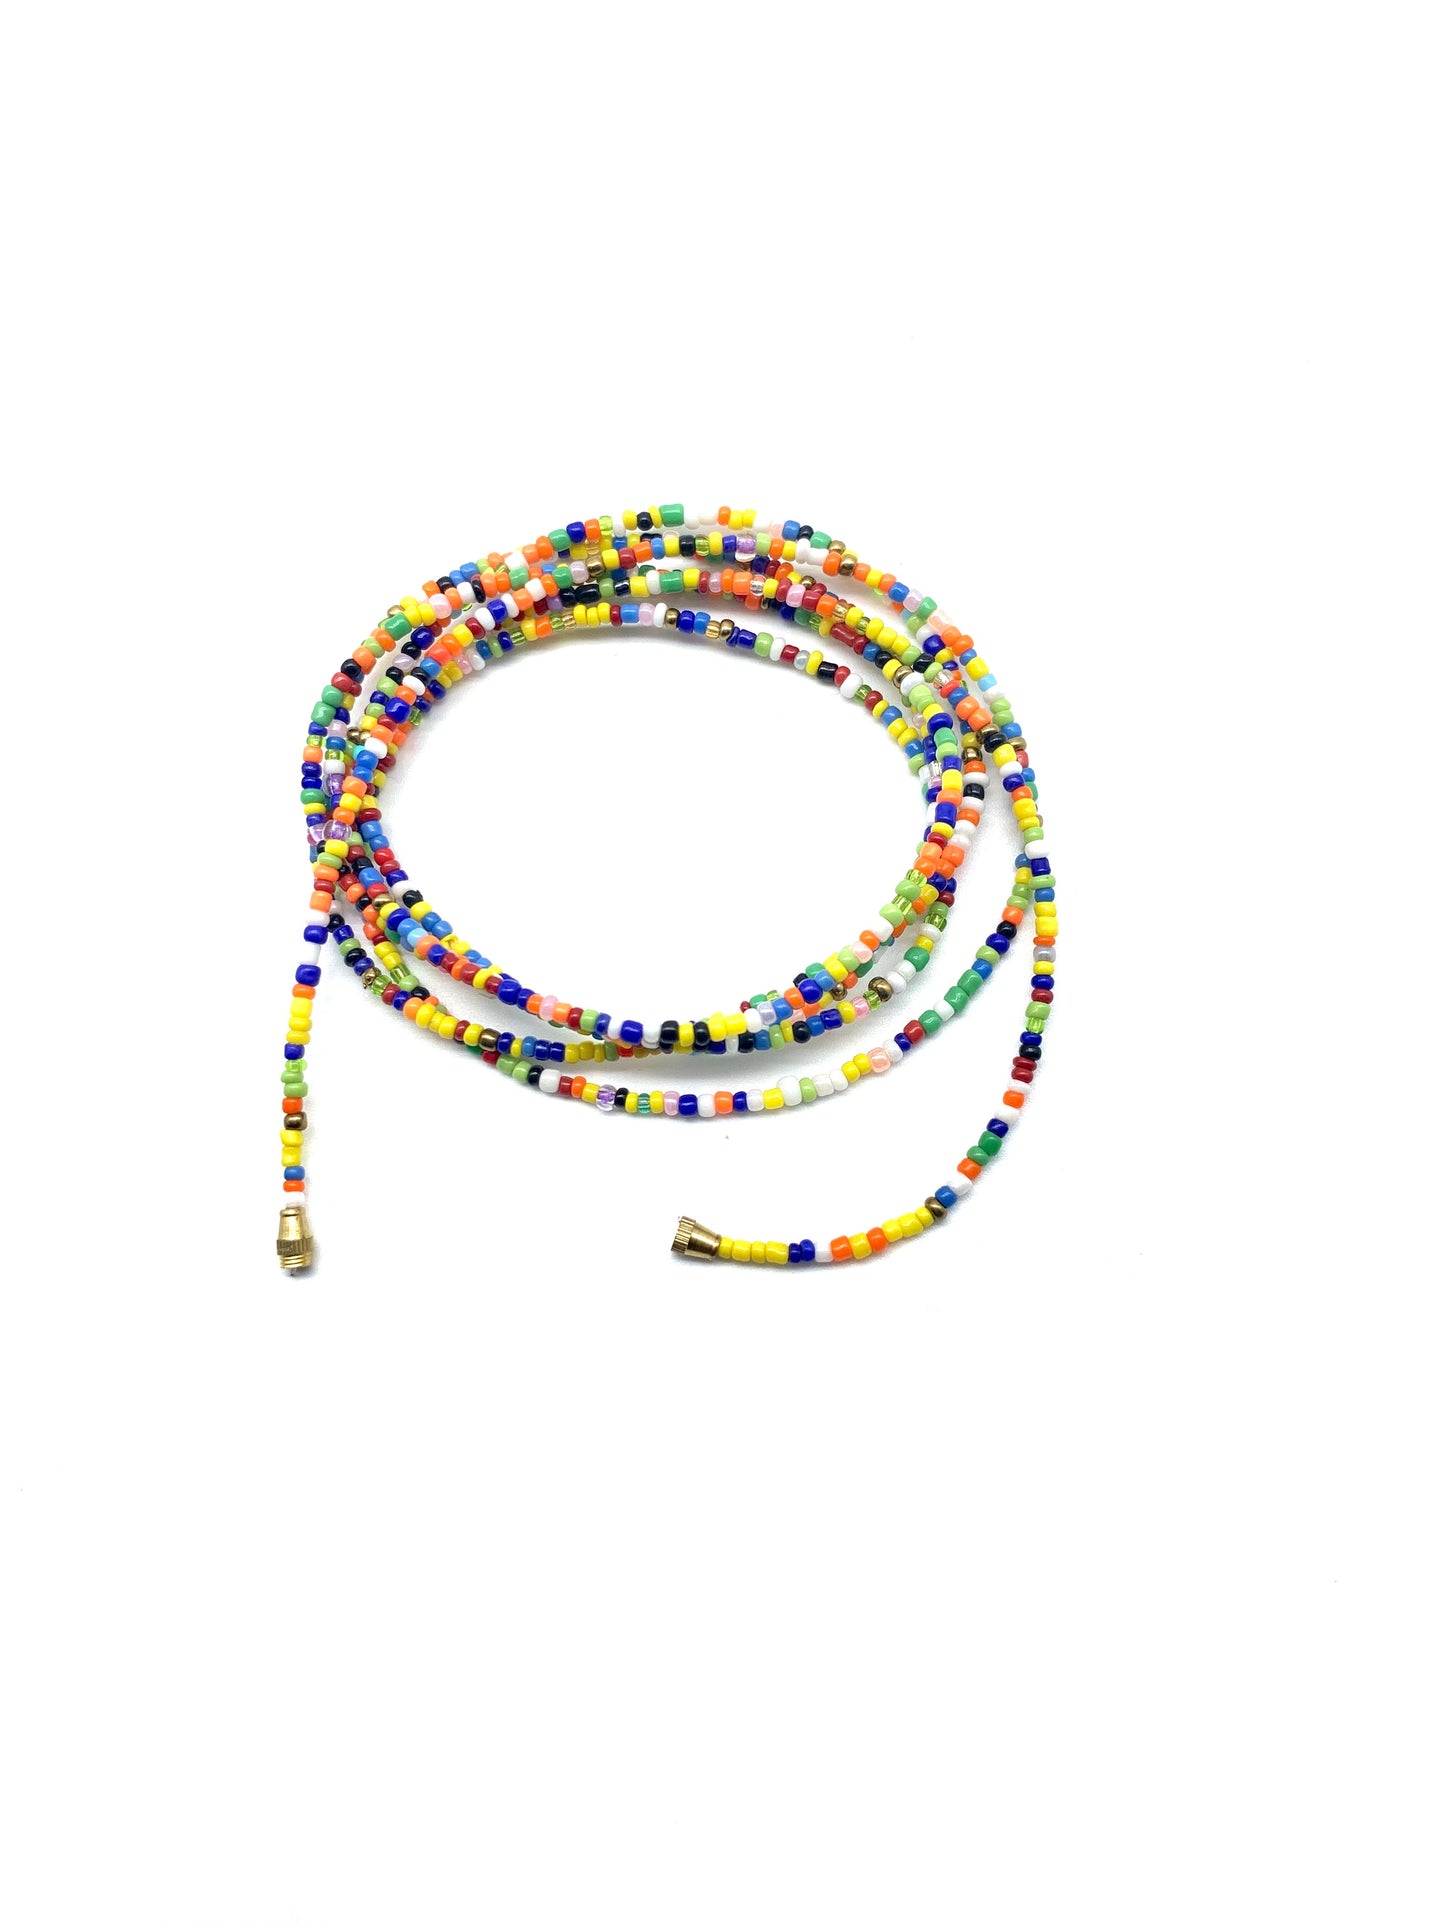 Earth Tone Multi Color! African Waist Beads / Necklace / Bracelet / Anklet